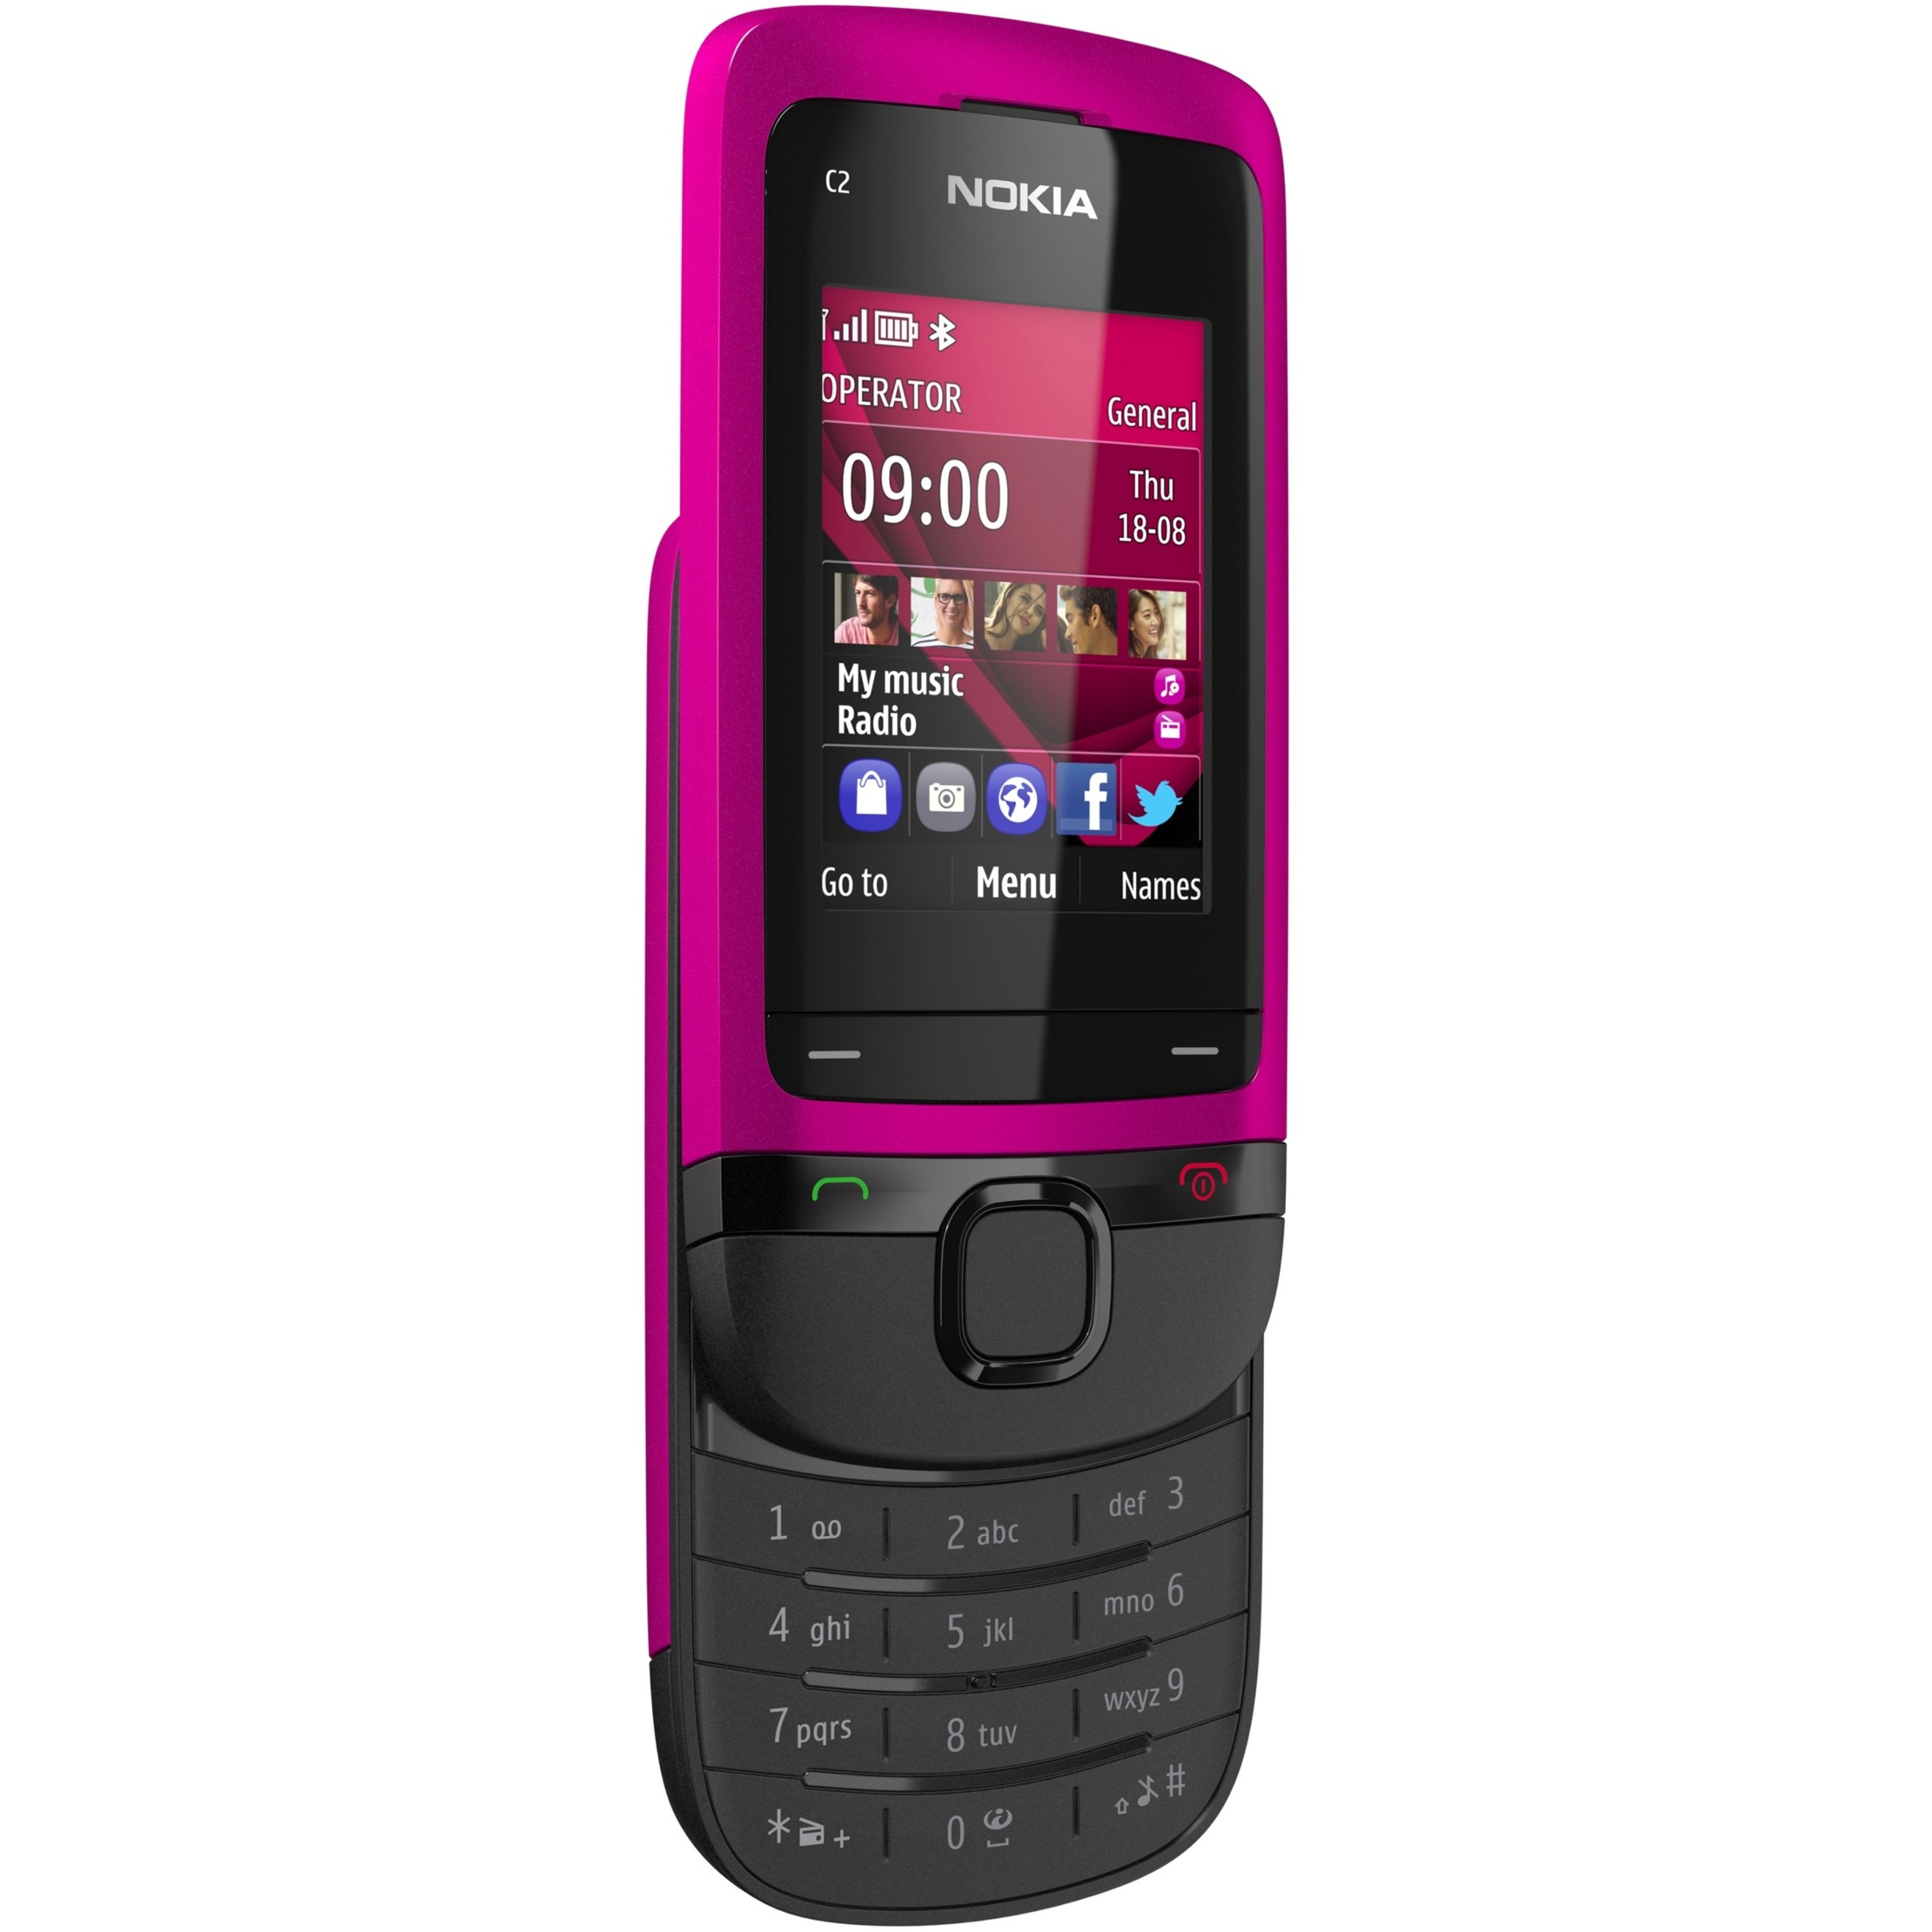 Microsoft C2-05 64 MB Feature Phone, 2" LCD QVGA 320 x 240, 16 MB RAM, 2.5G, Pink - image 3 of 6